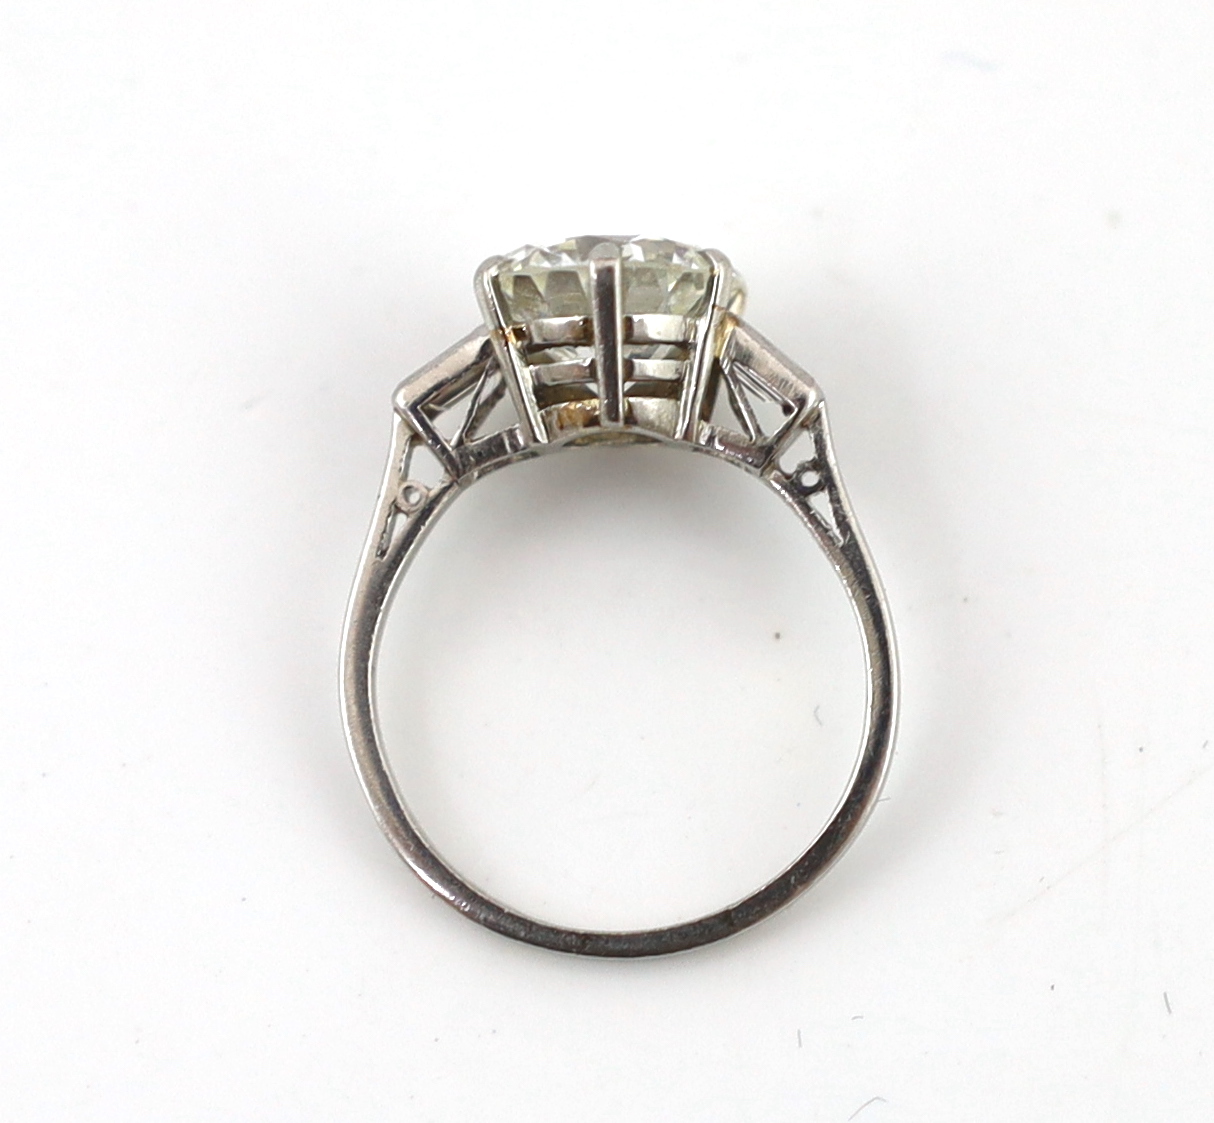 A good platinum or white gold set single stone diamond ring, with two stone baguette cut diamond set shoulders